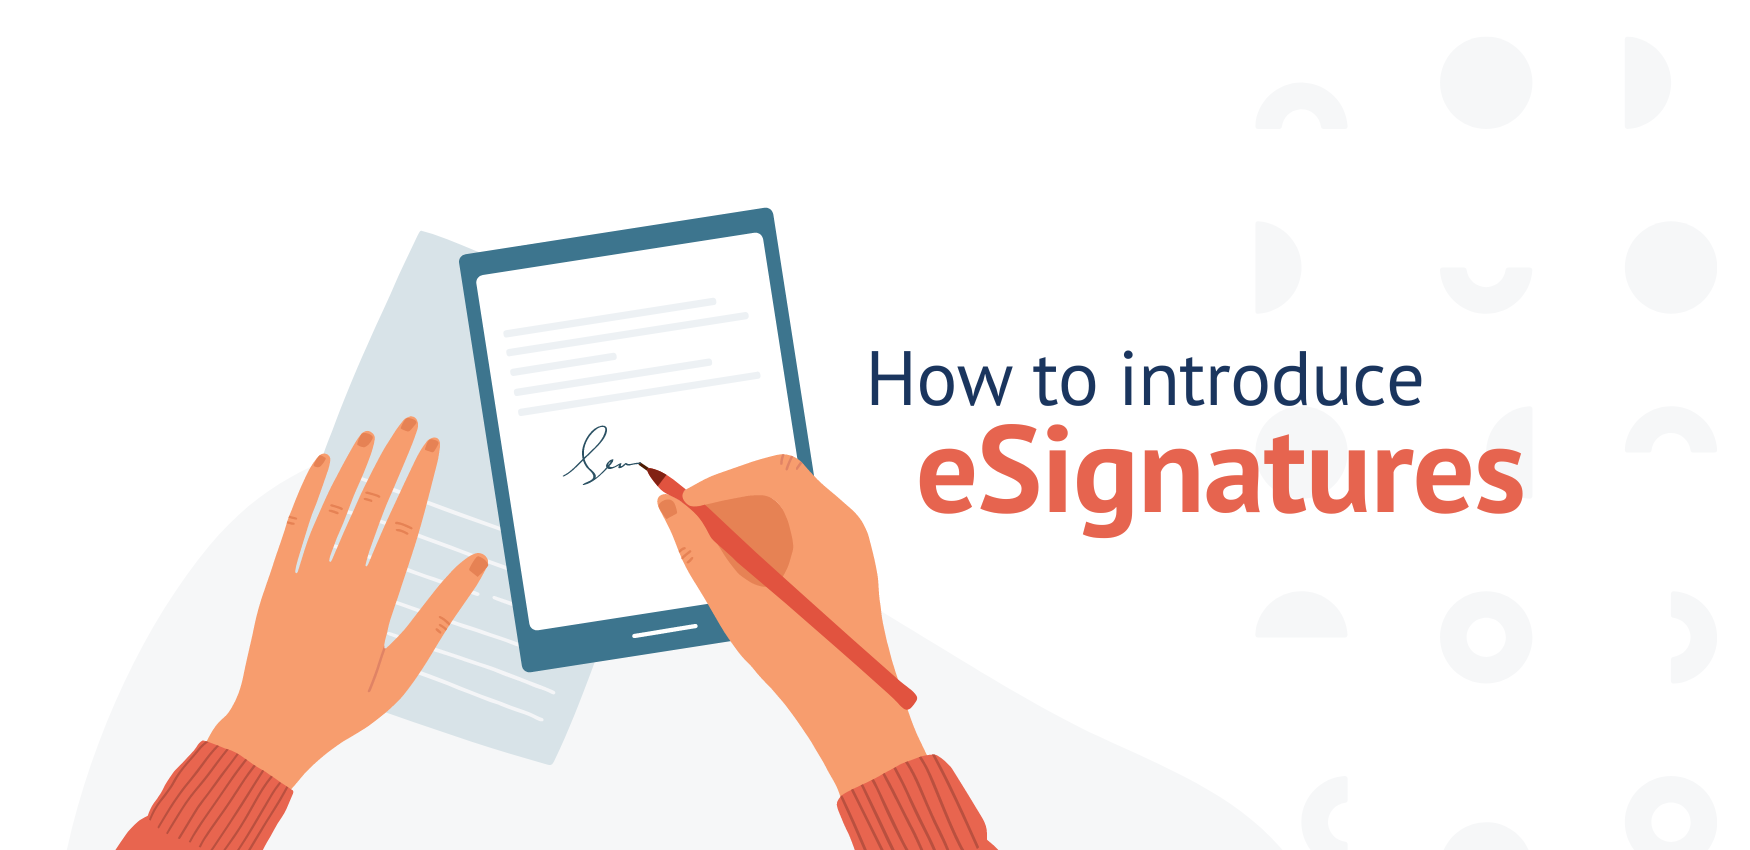 Finding Success with New Technology: How to Introduce eSignatures in Your Funeral Home